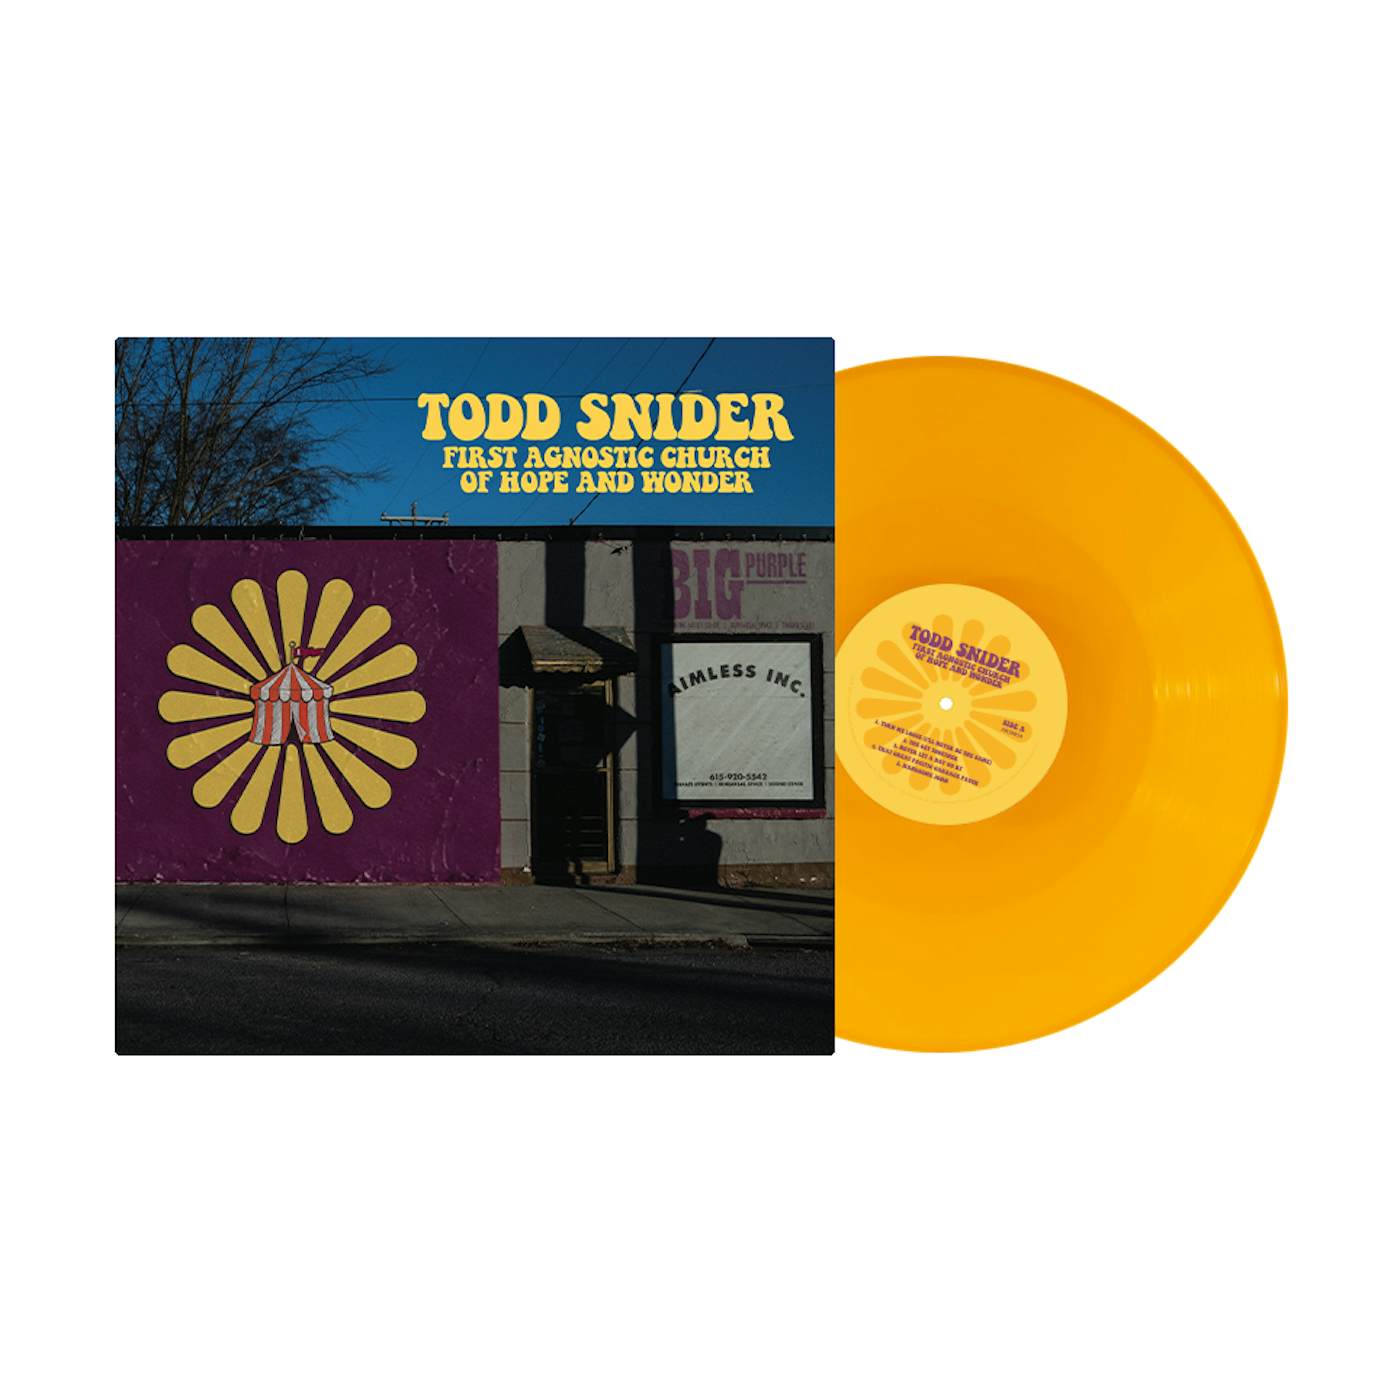 Todd Snider FAC Limited Edition Yellow Vinyl - Sold Out